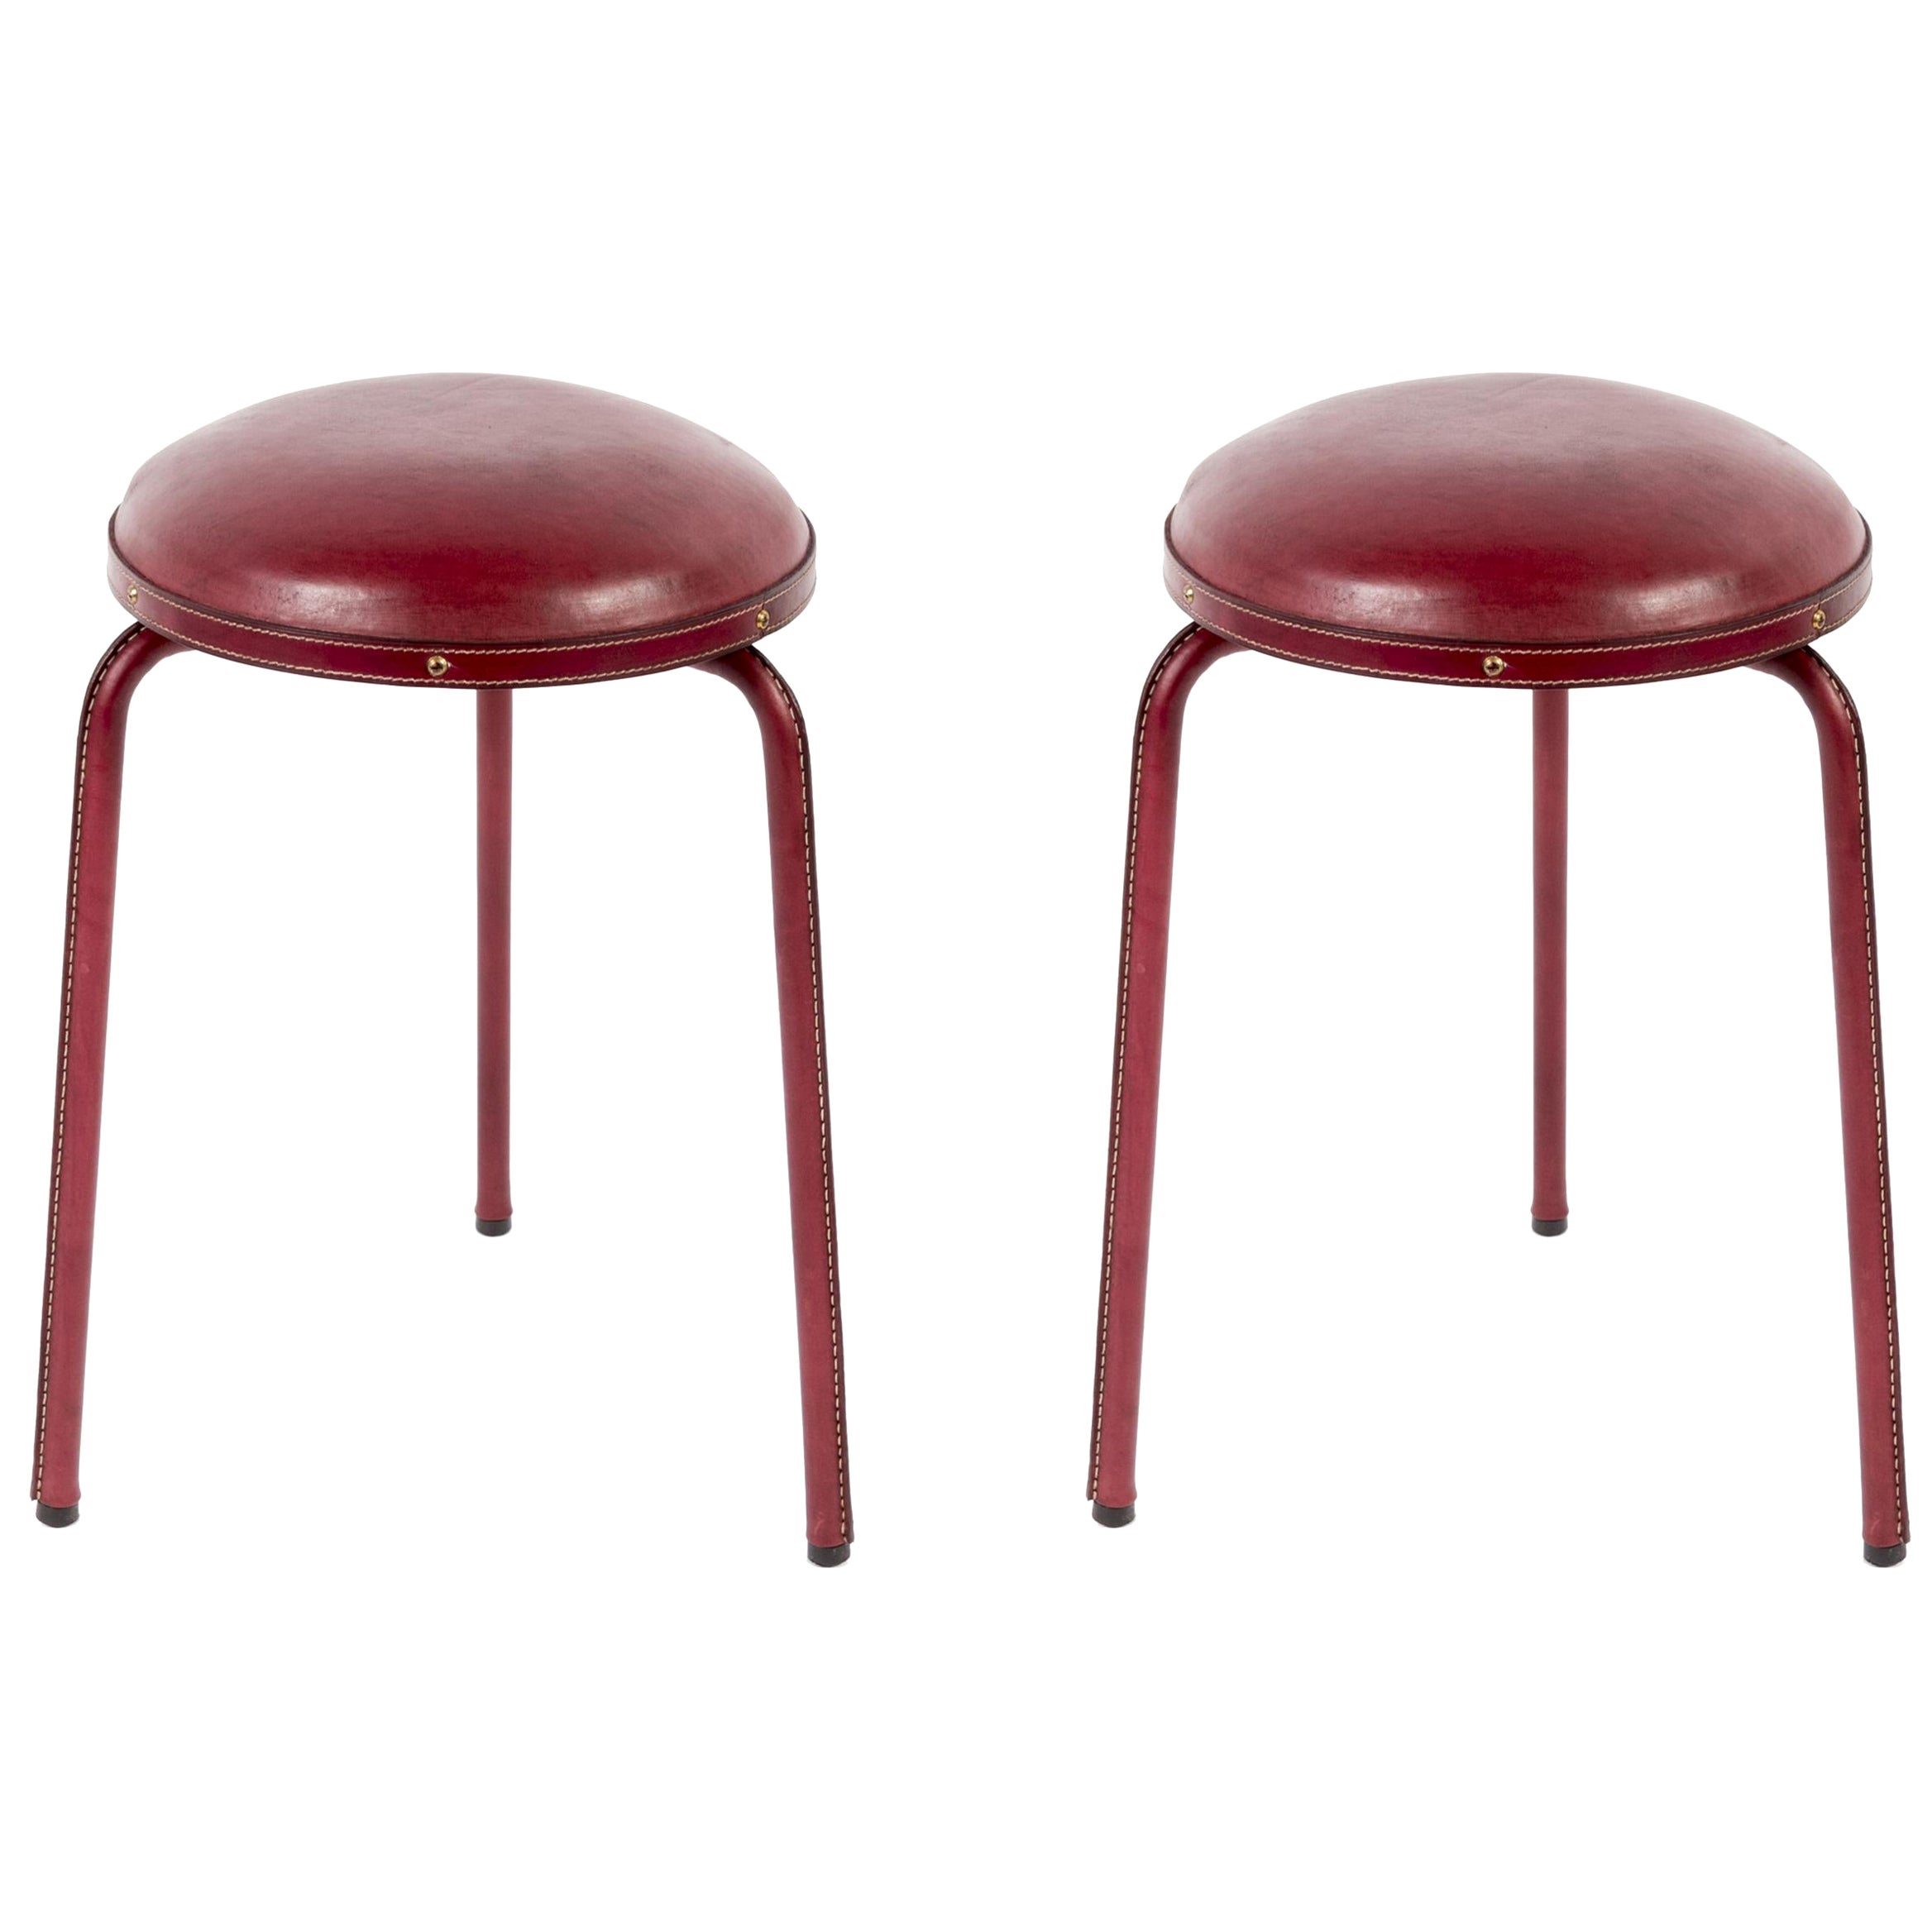 1950's Stitched Leather Stools by Jacques Adnet